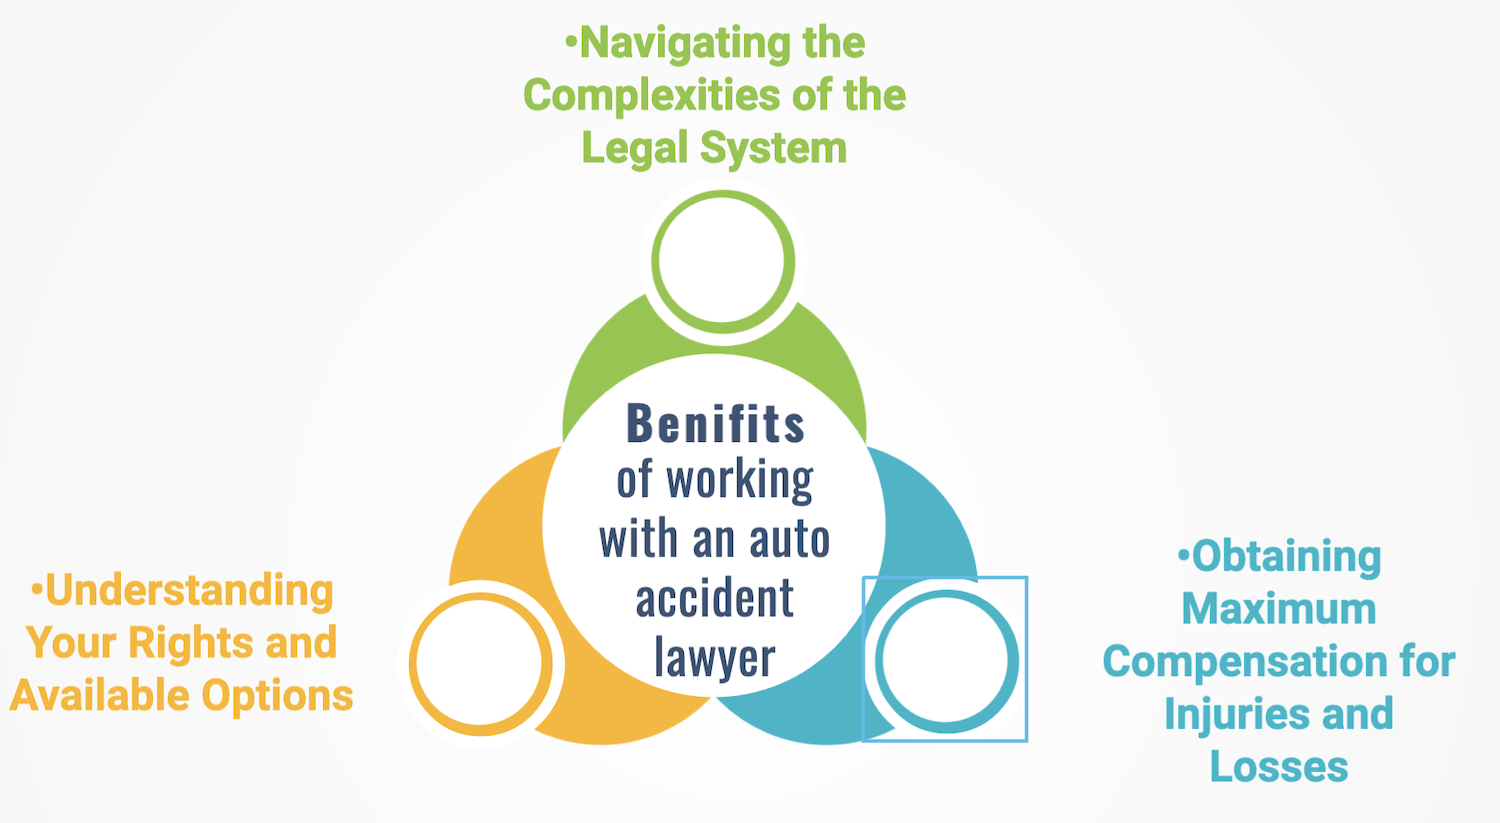 Benefits of an auto accident attorney